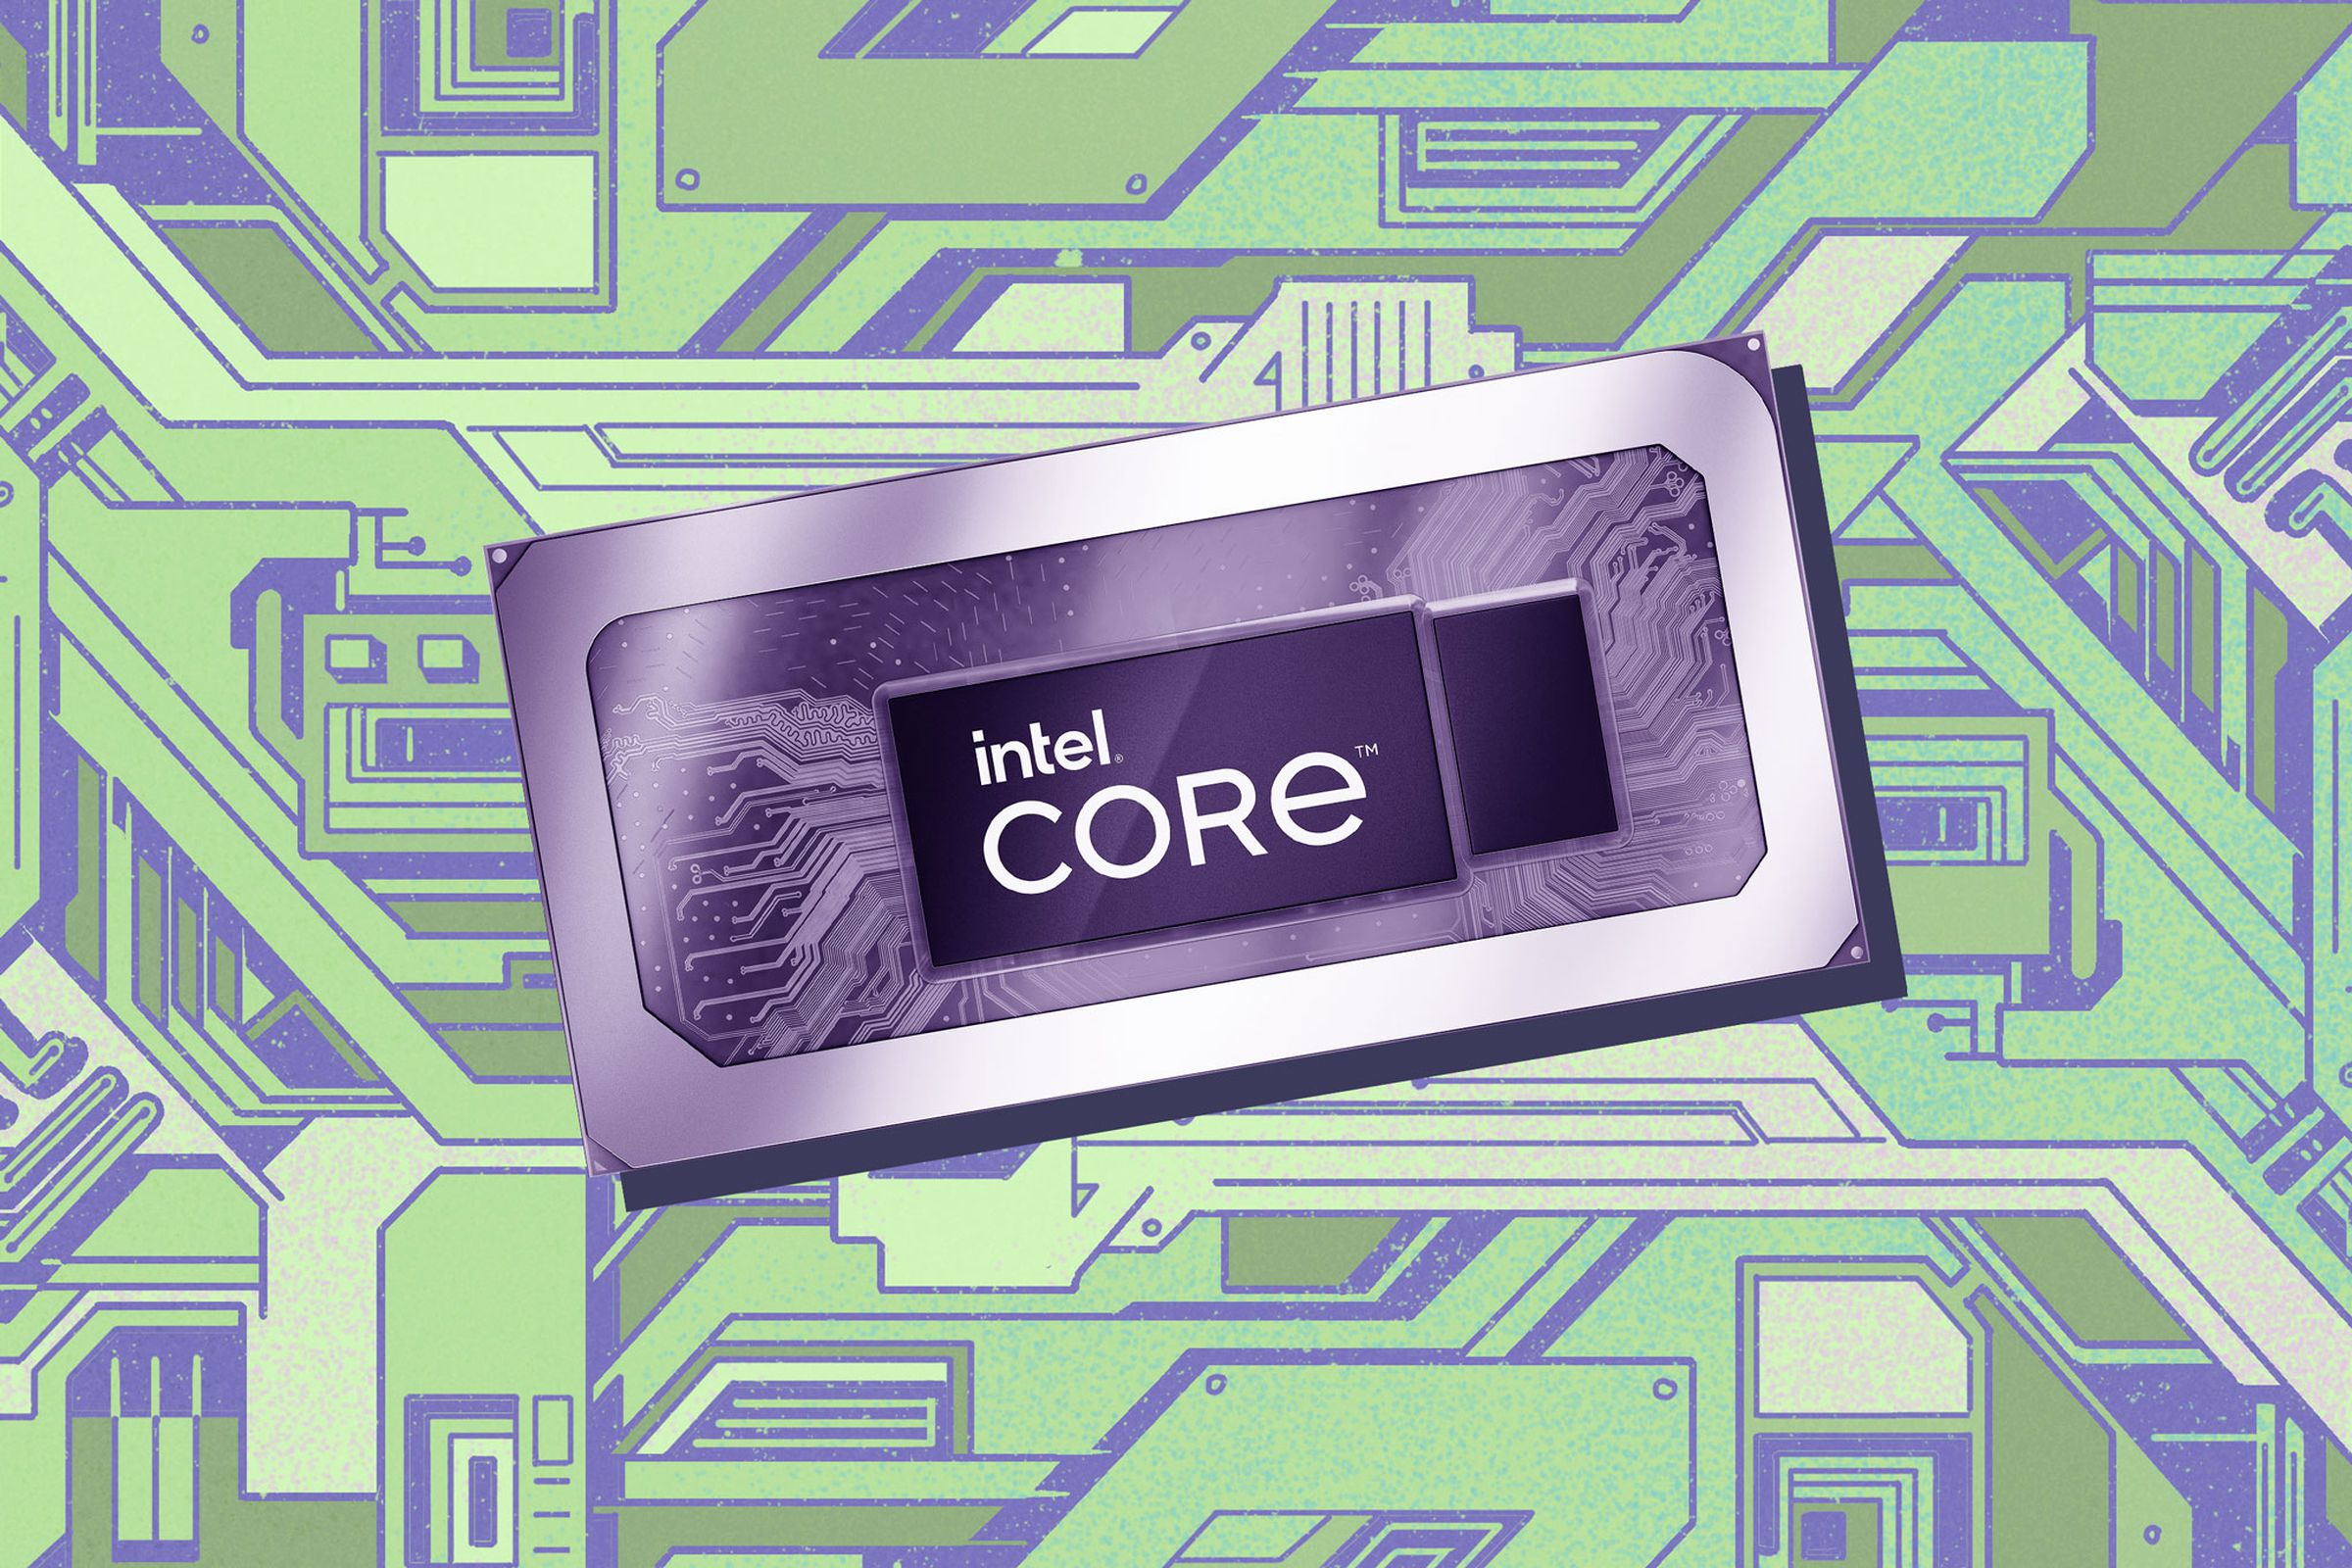 Computer chip labeled “Intel Core” against a green background with maze-like shapes behind it.